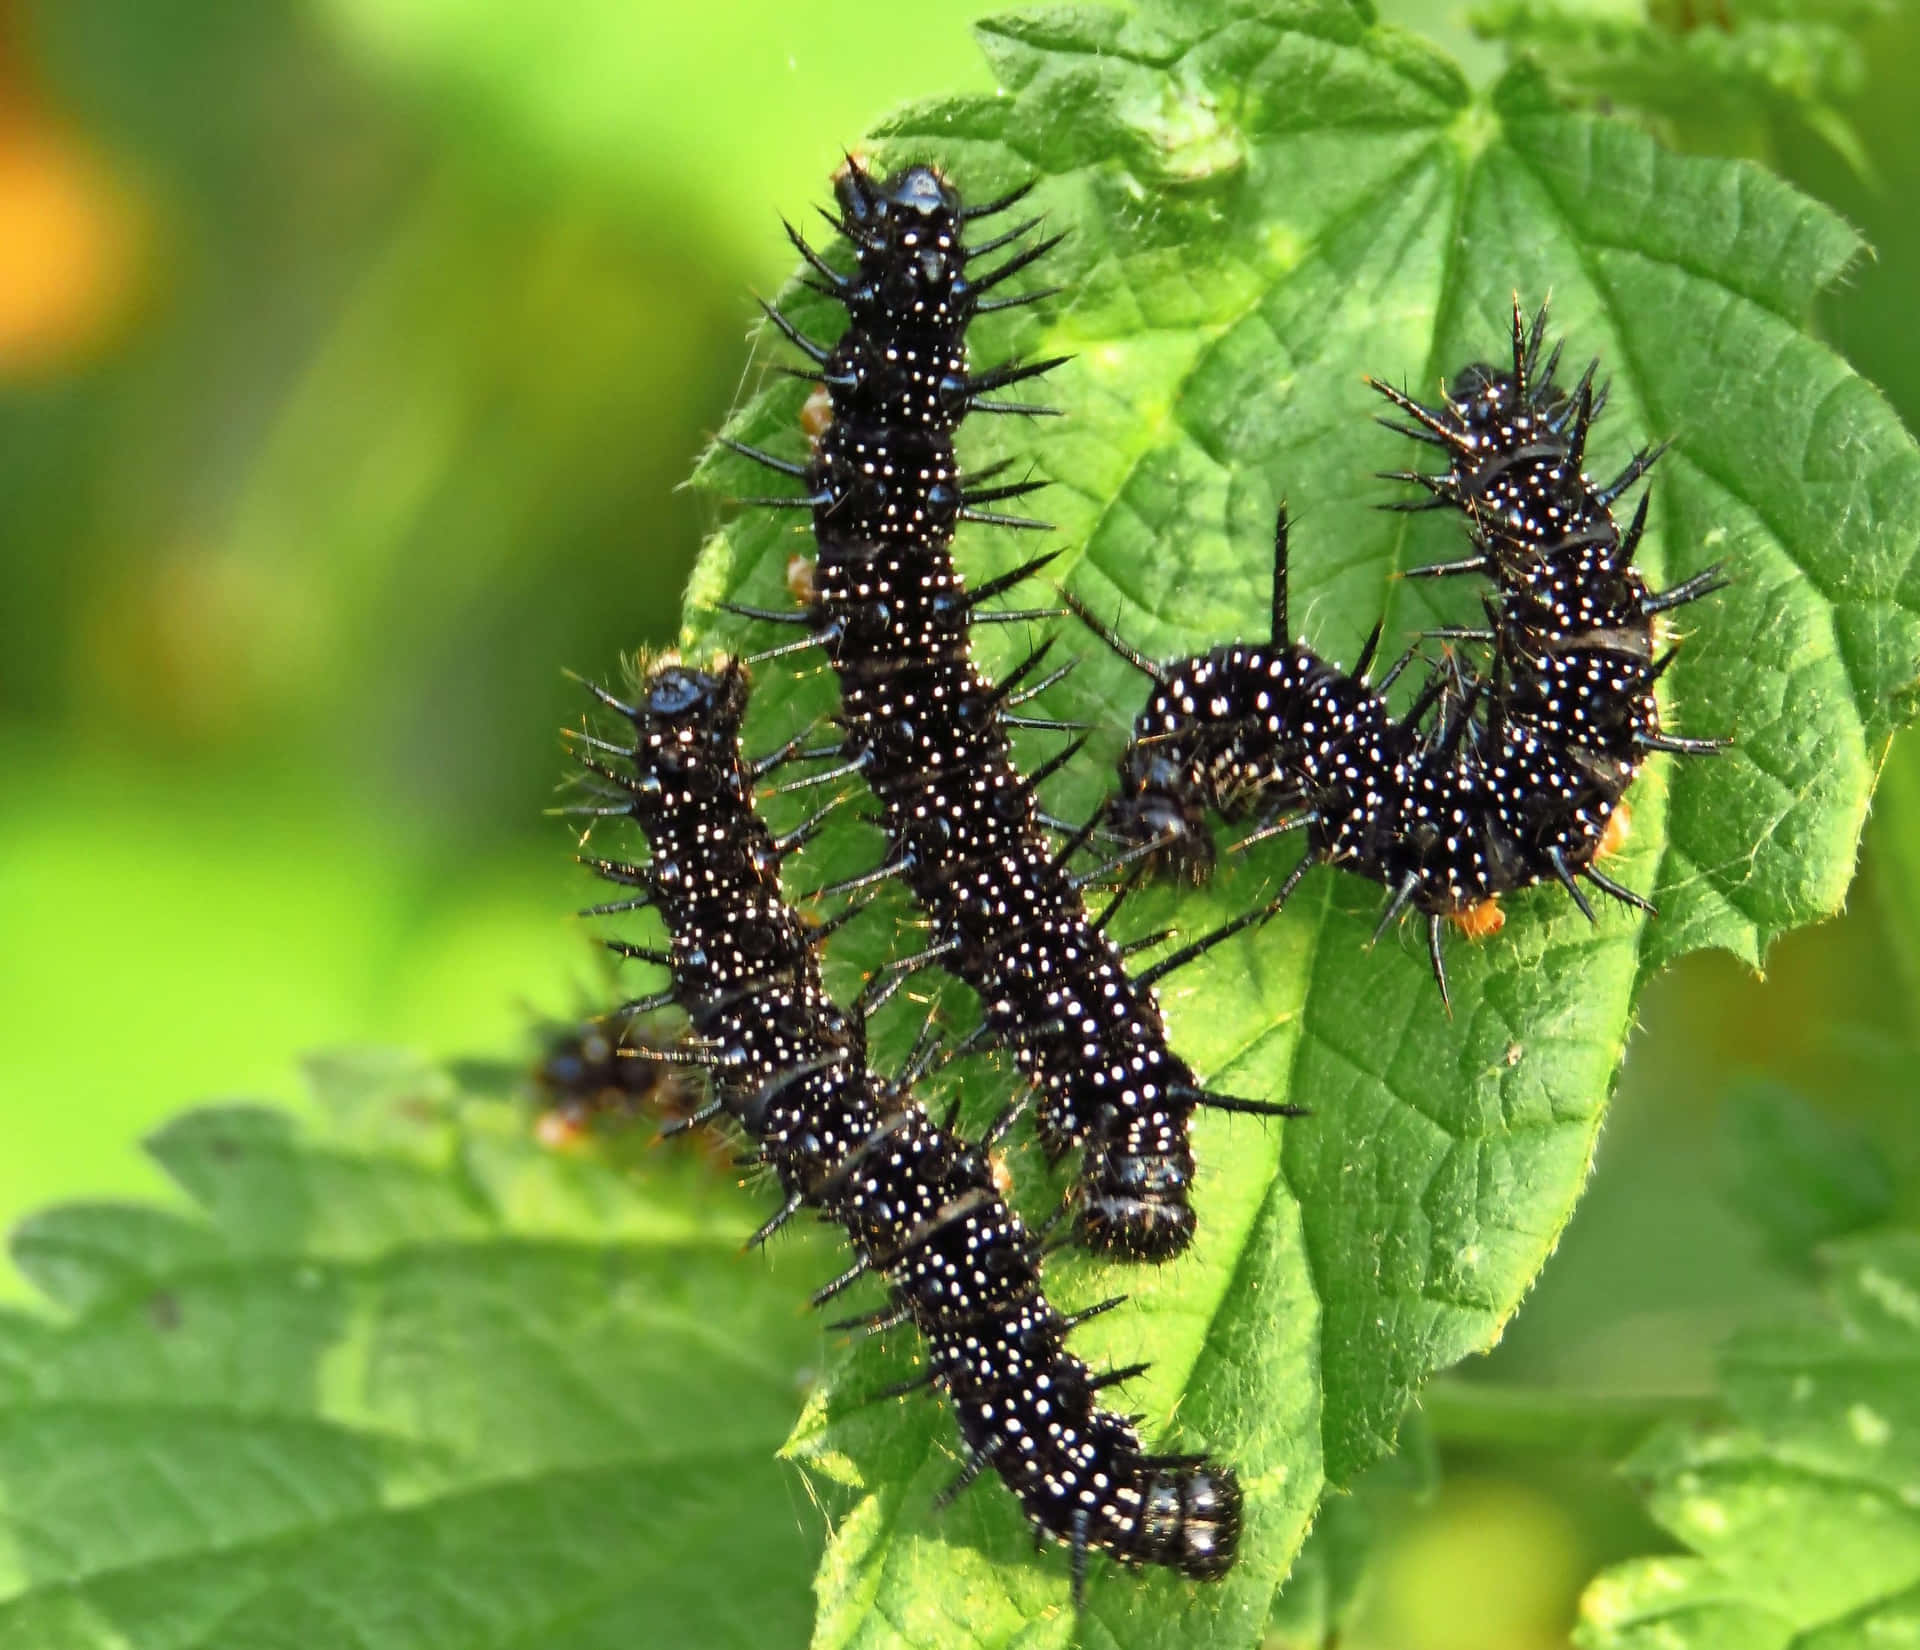 A Group Of Caterpillars On A Leaf